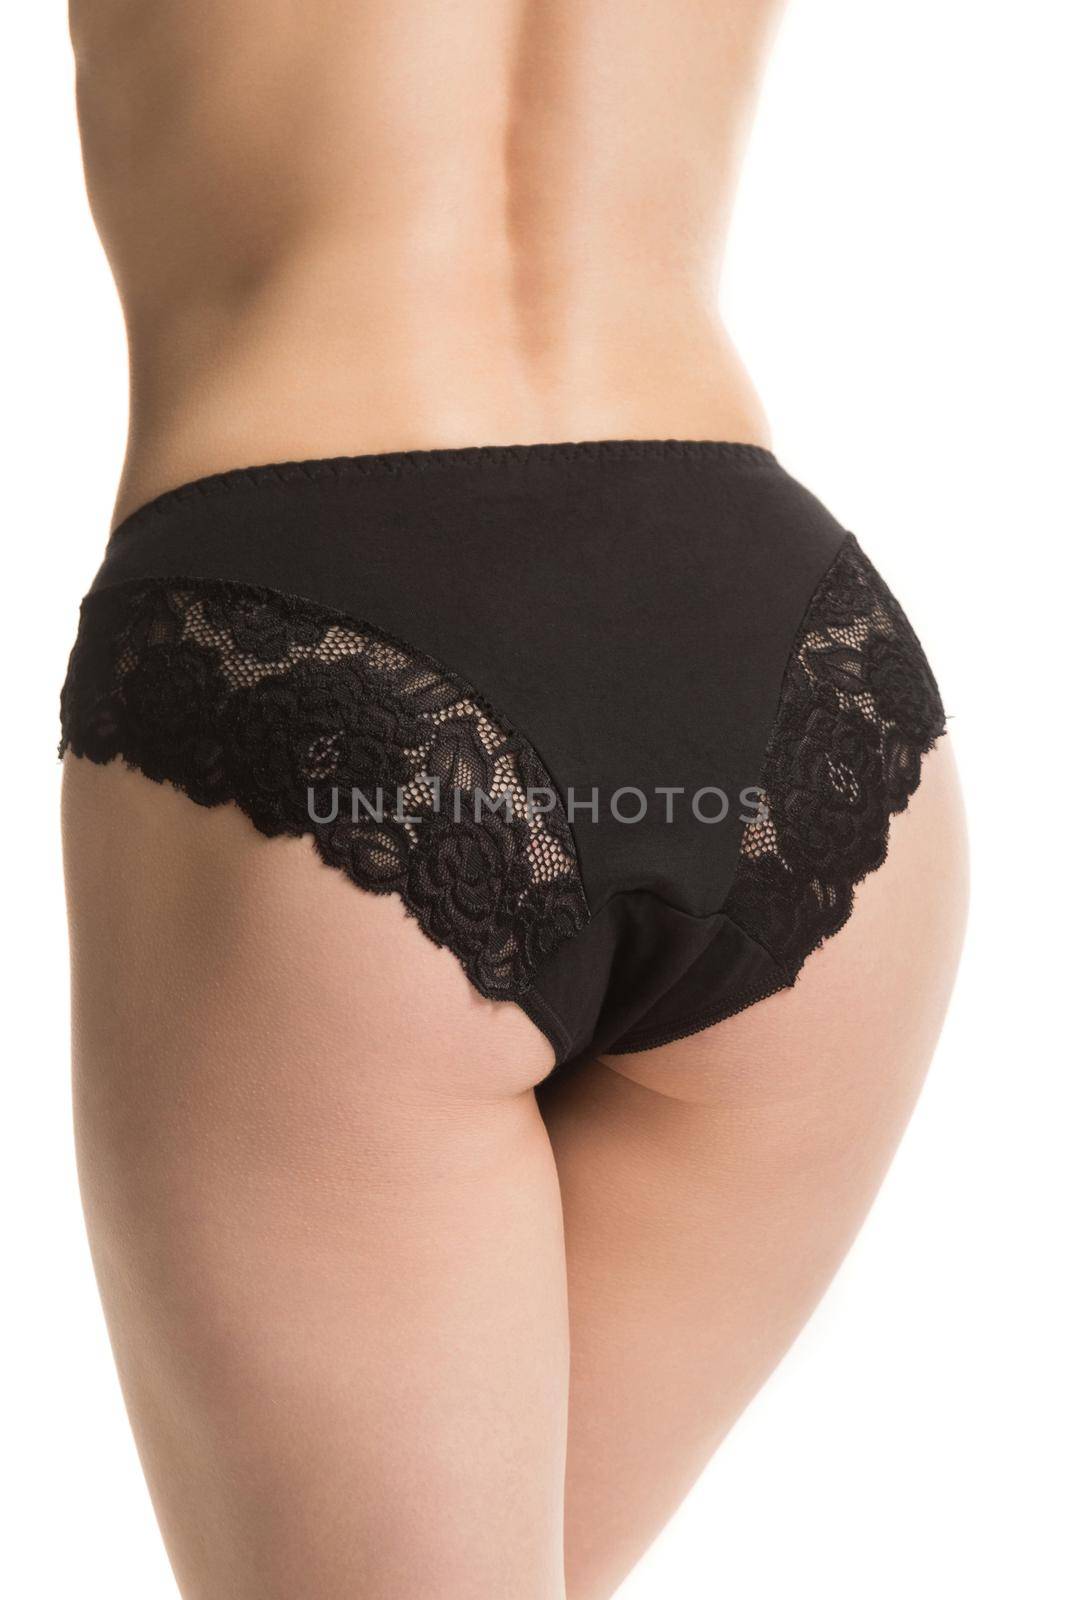 girl in black lace panties, back view, half-length shot on a white background by TRMK